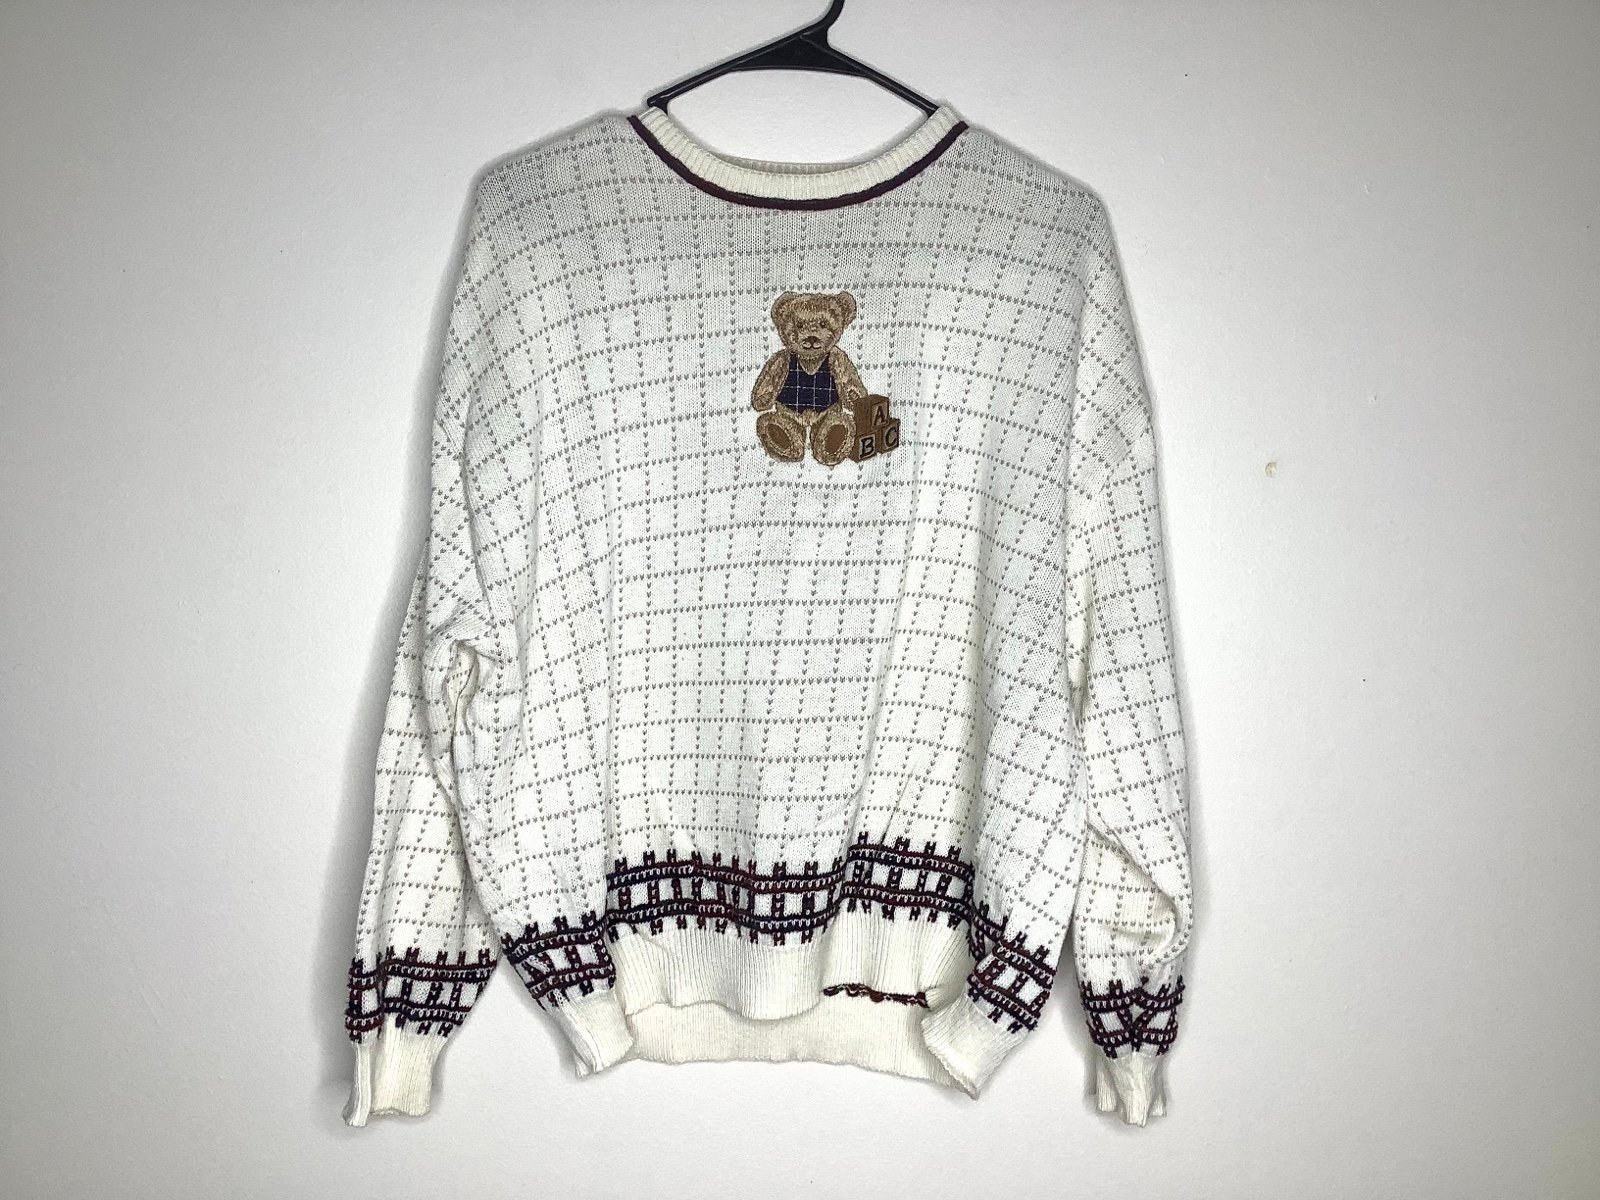 Classic Vintage Embroidered Teddy Bear Sweater JP2IV9rj